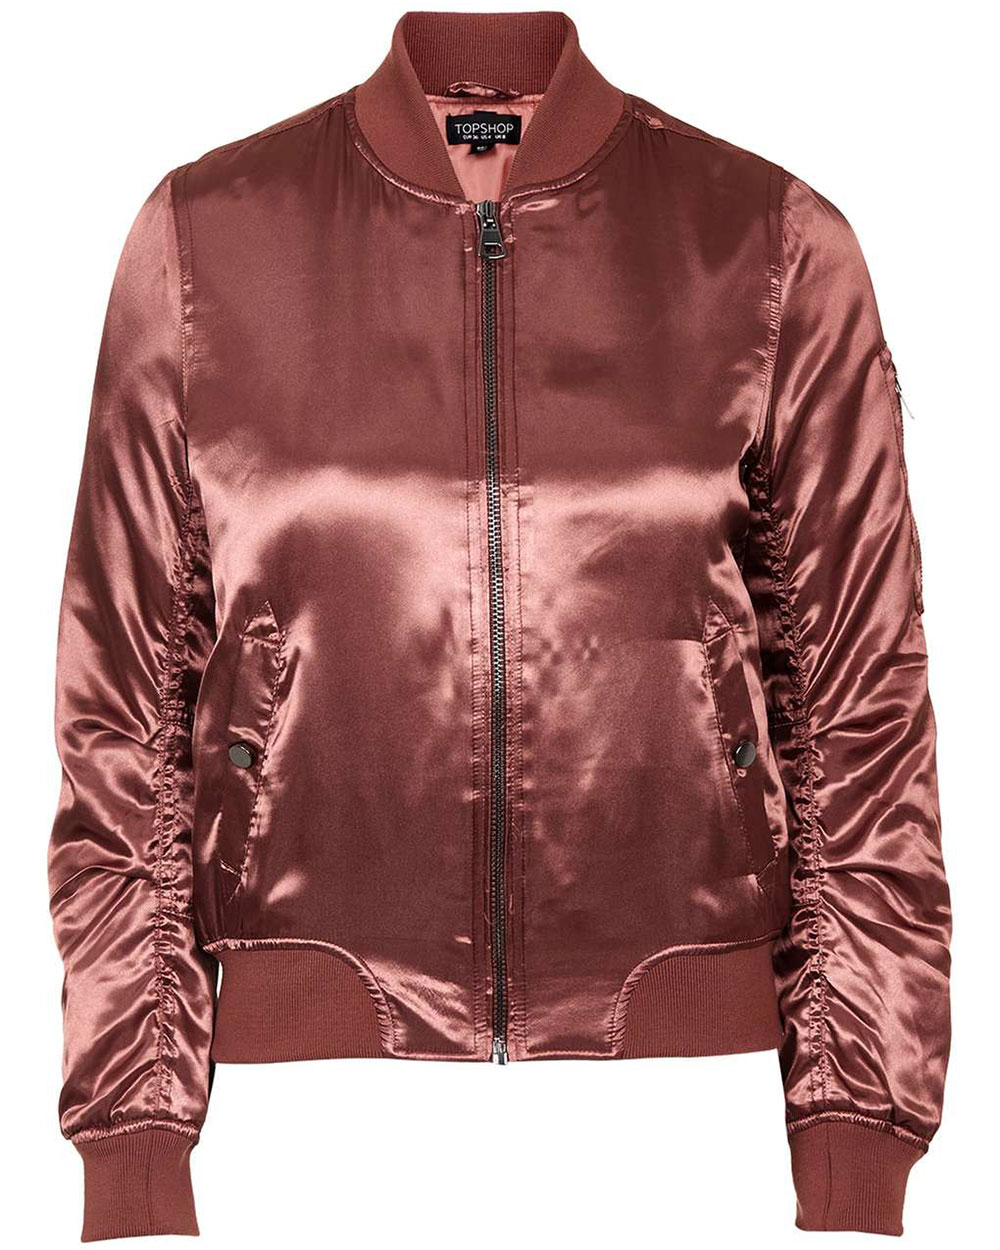 Topshop Bomber jacket, approx. $120